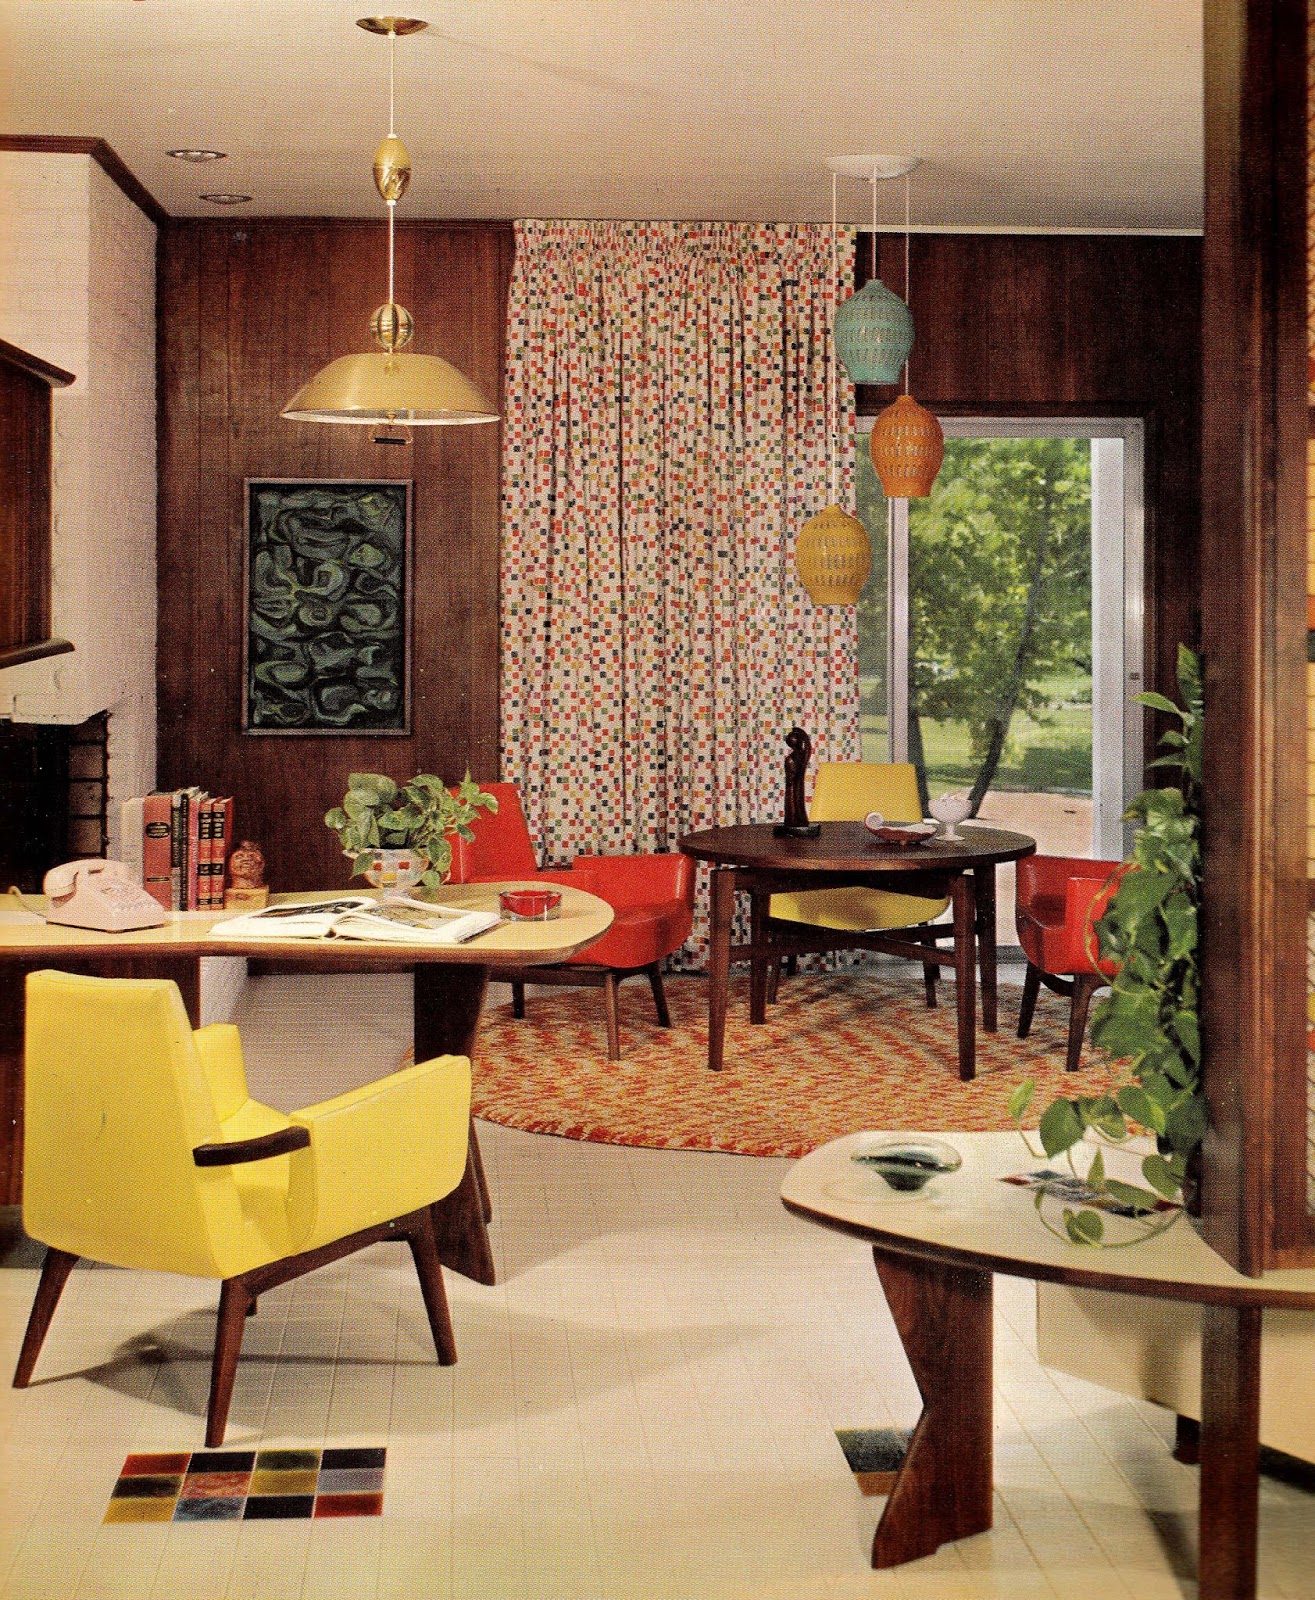 1960s Interior Dcor: The Decade of Psychedelia Gave Rise to Inventive ...